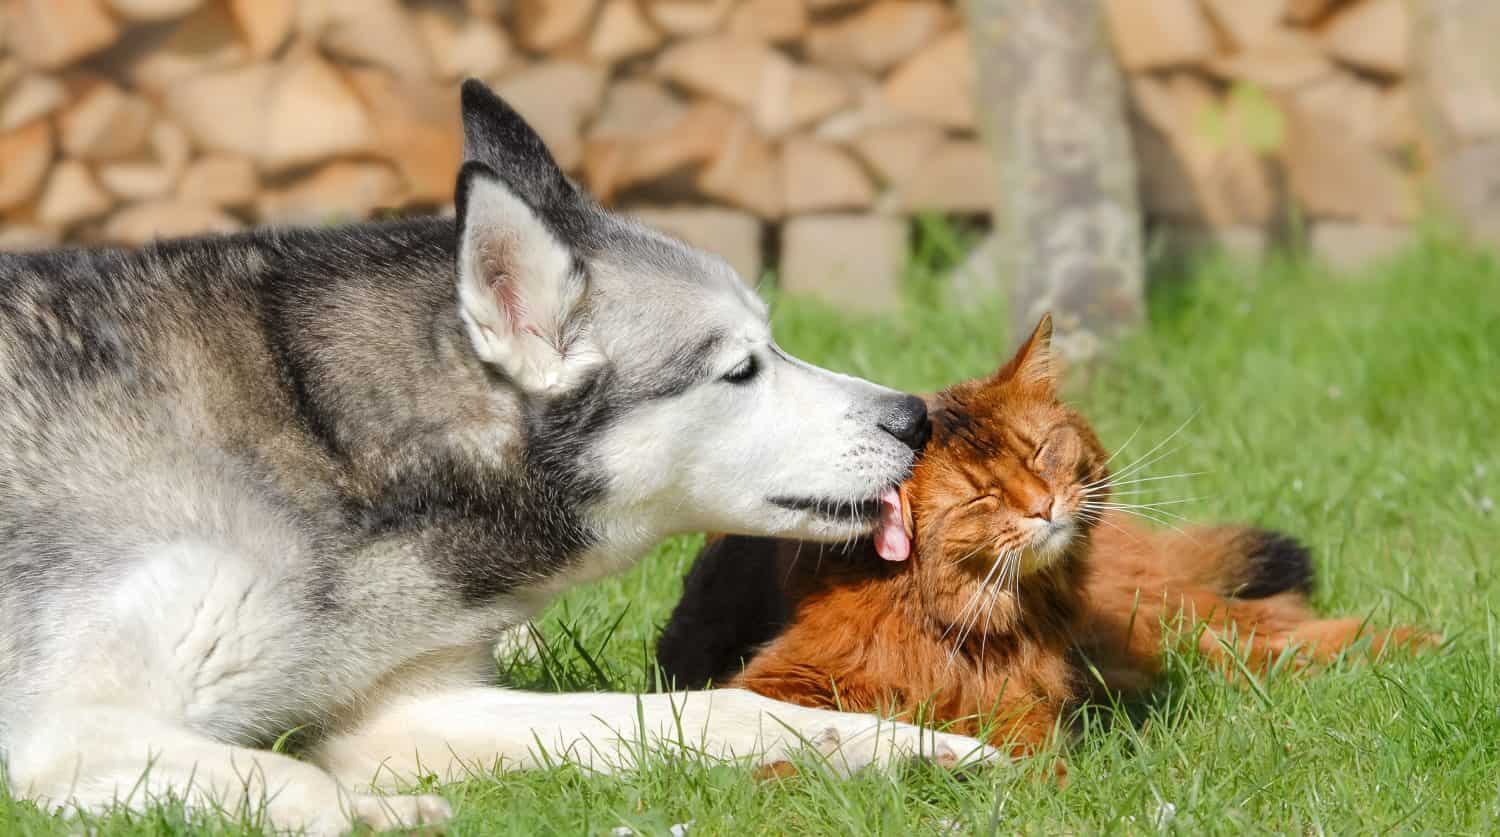 Siberian Husky dog licking Somali cat, they lying together side by side fondly grooming in a green grass meadow in a garden, a close friendship between the dog and the kitty